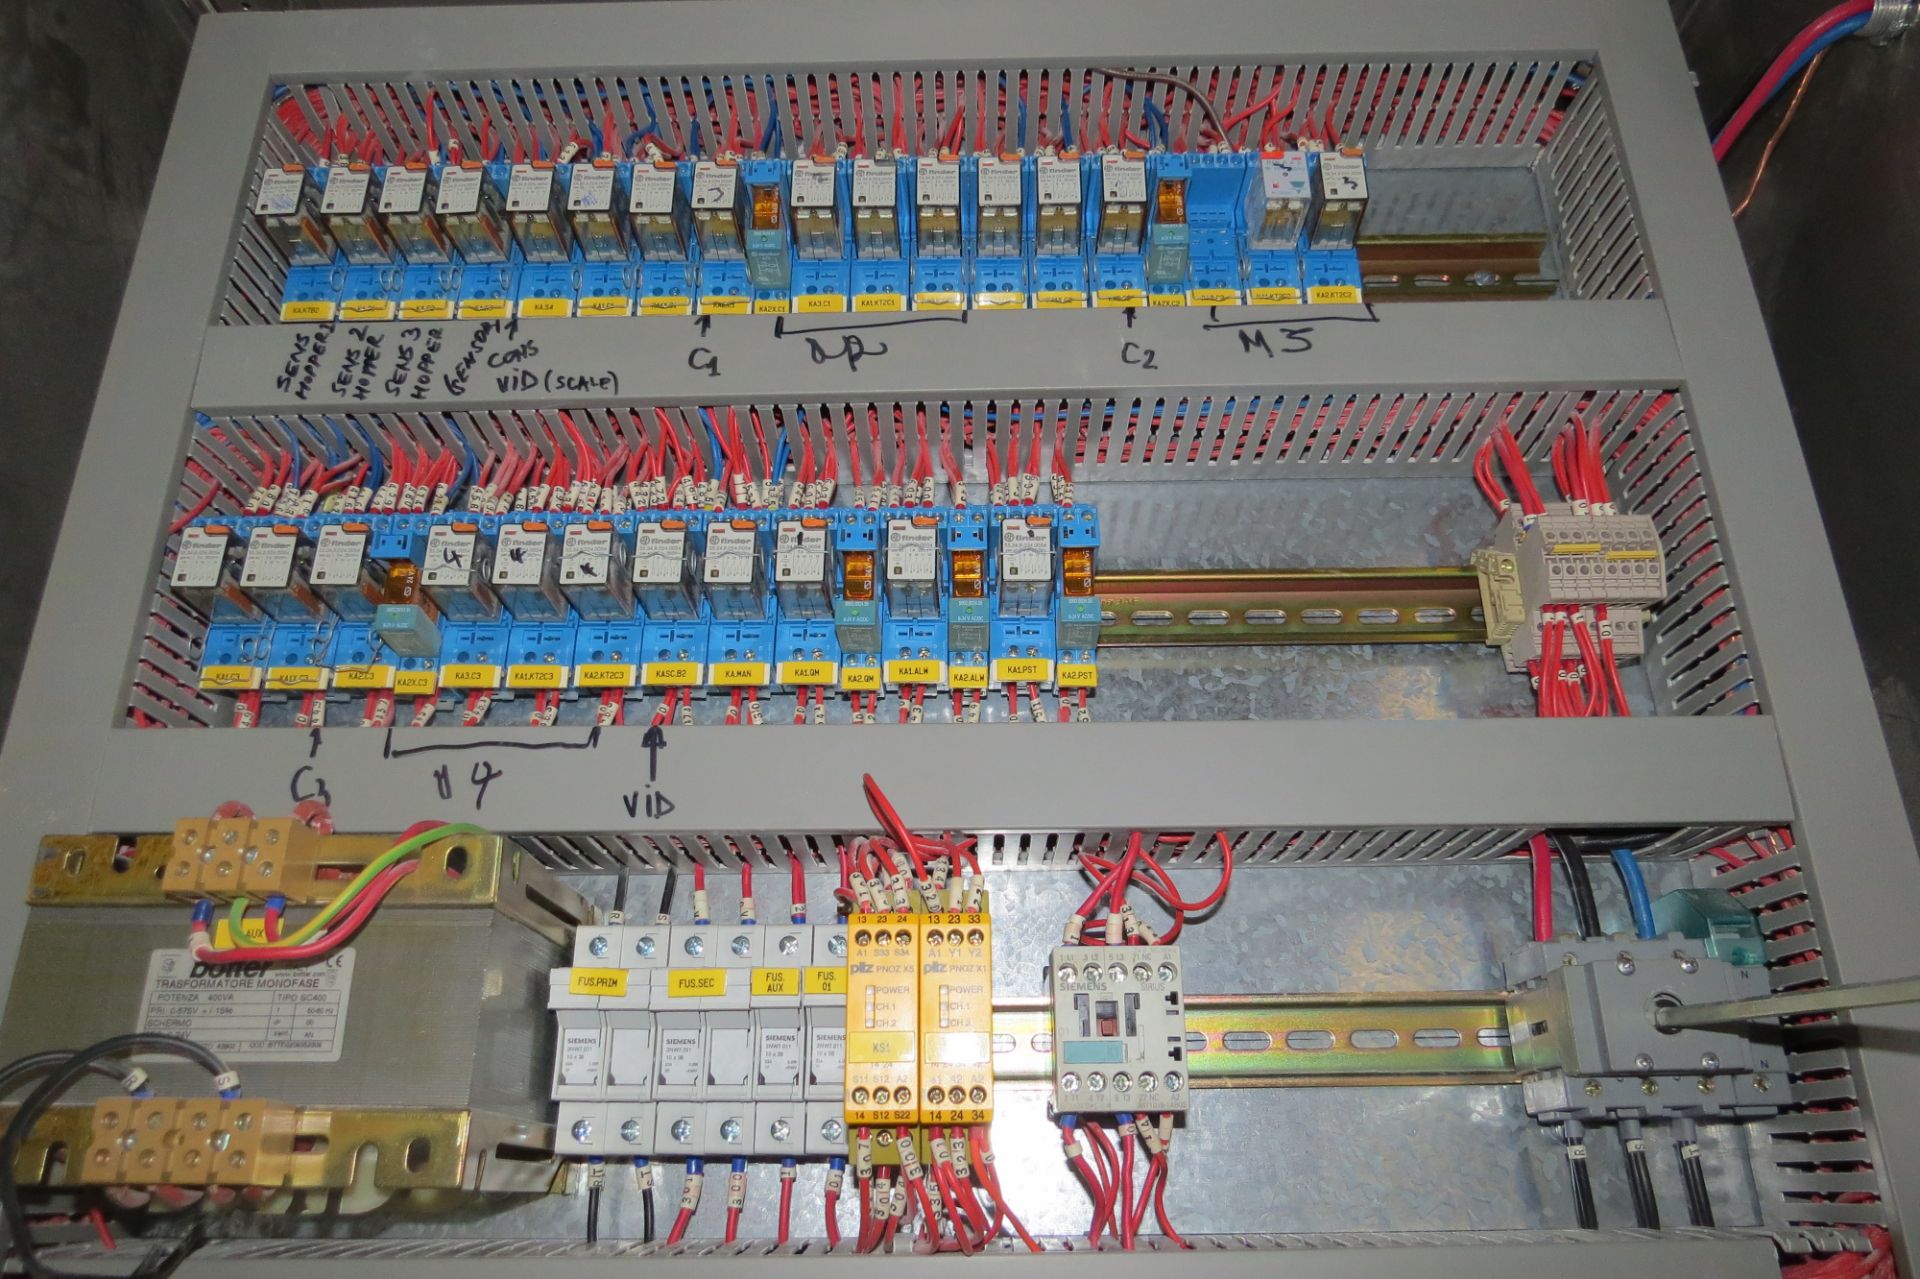 Control Panel for Batch Weighing System and Hopper distribution for lots 4, 6A, 6B, & 6C - Image 5 of 5